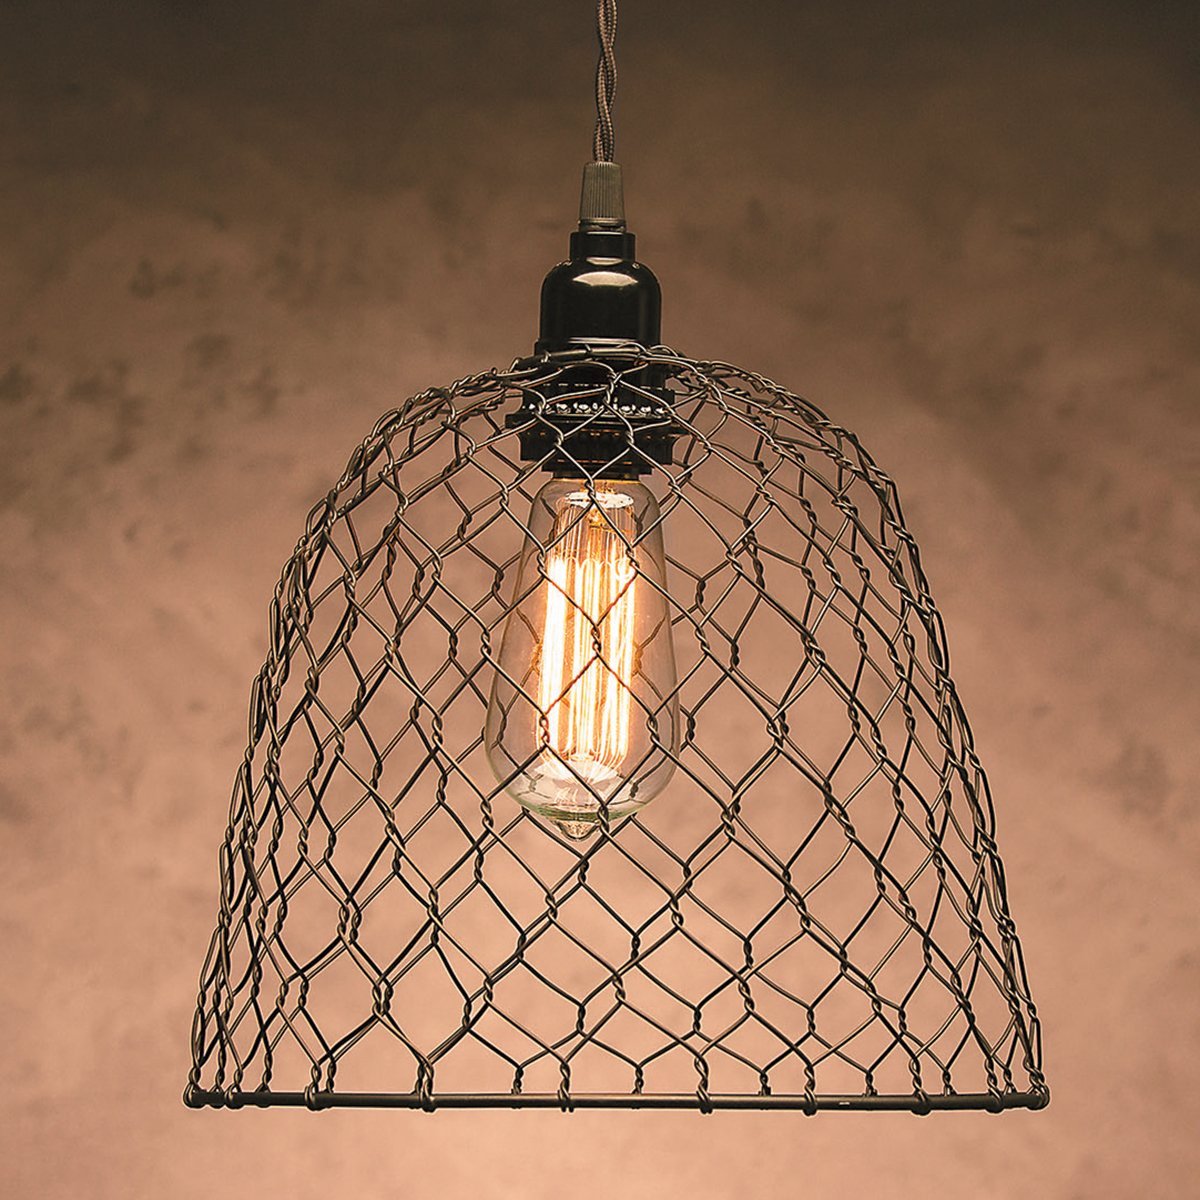 Cle3039 10 X 8.25 In. Metal Chickenwire Lampshade - Black, Dome